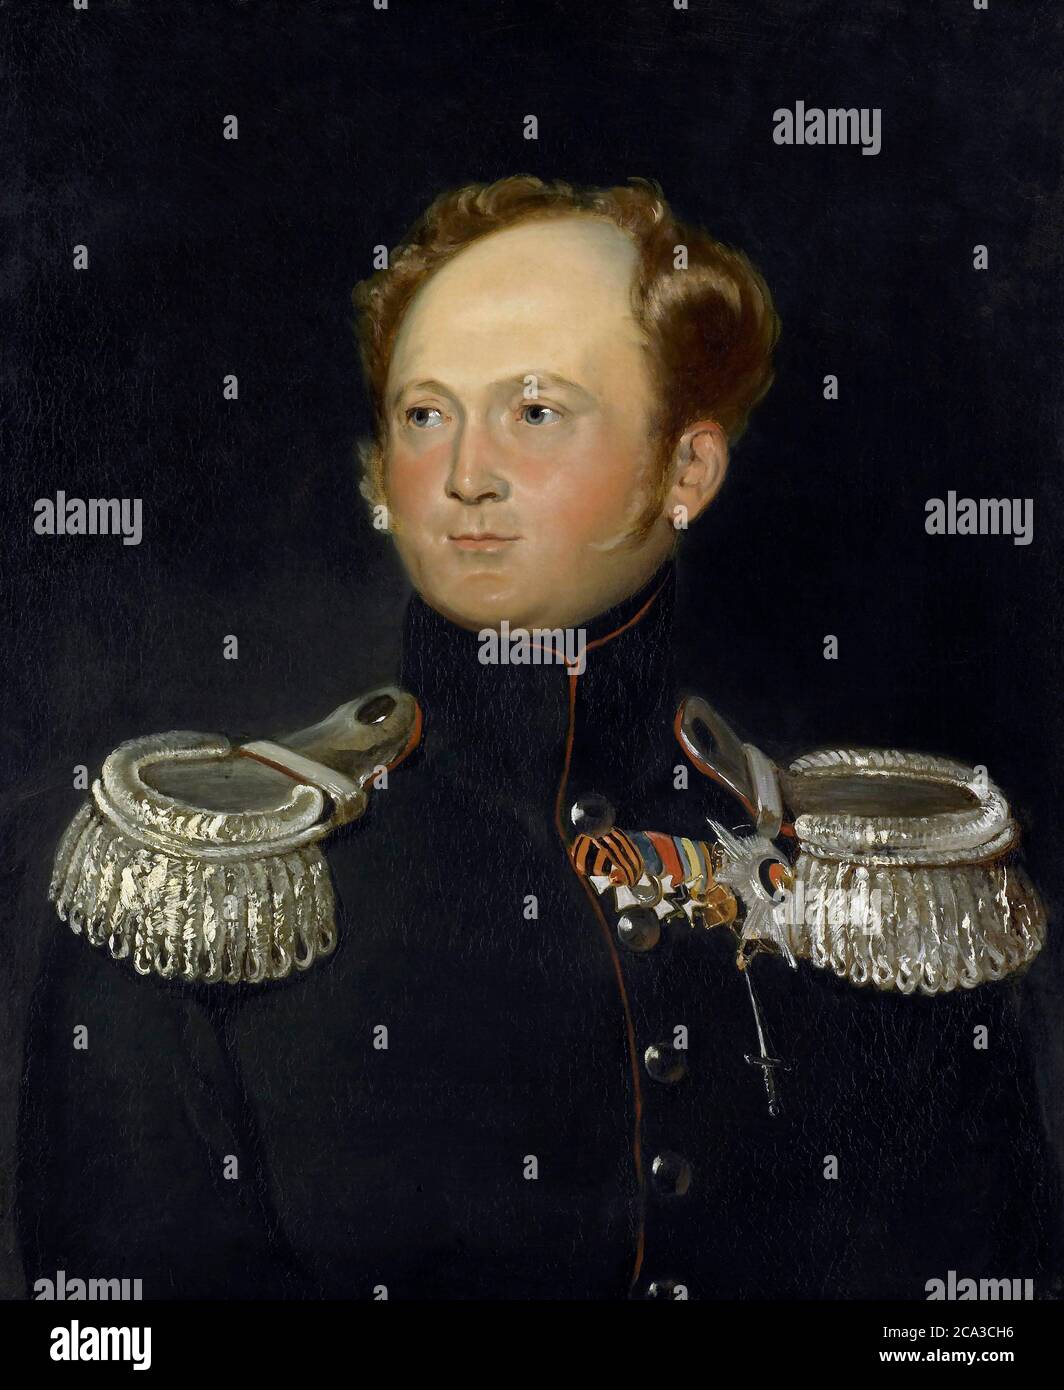 Emperor Alexander I of Russia, 1777 â. “1825, aka Alexander the Blessed. Emperor of Russia. From an oil painting by Carl Gustaf Hjalmar Mörner in the Stock Photo